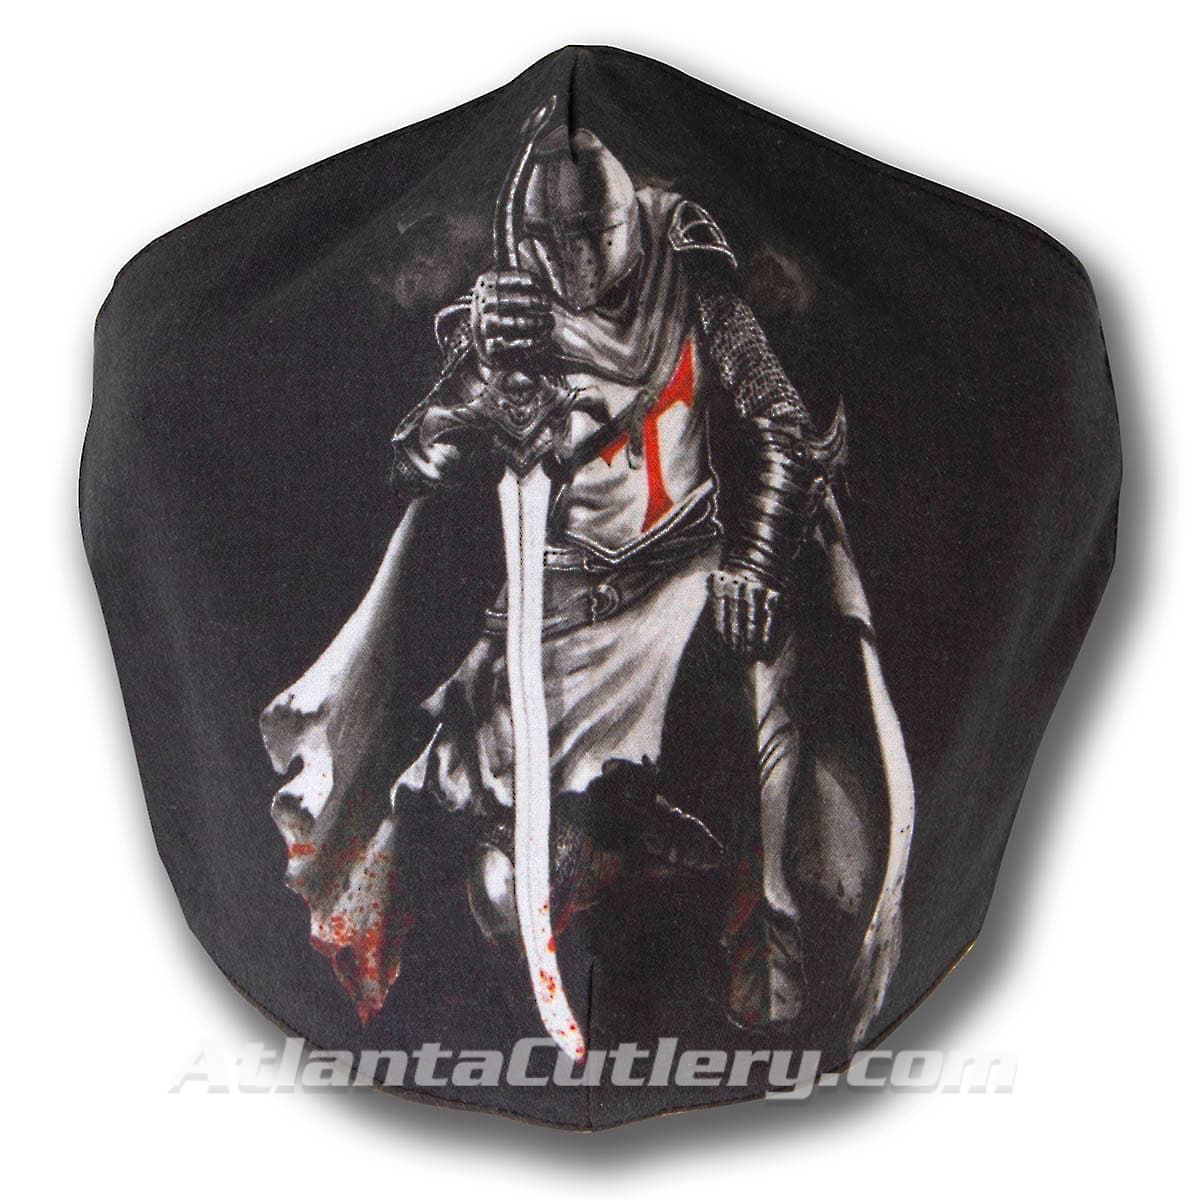 Black Cotton Face Mask with screen image of Templar Knight, adjustable straps and pocket for disposable filter